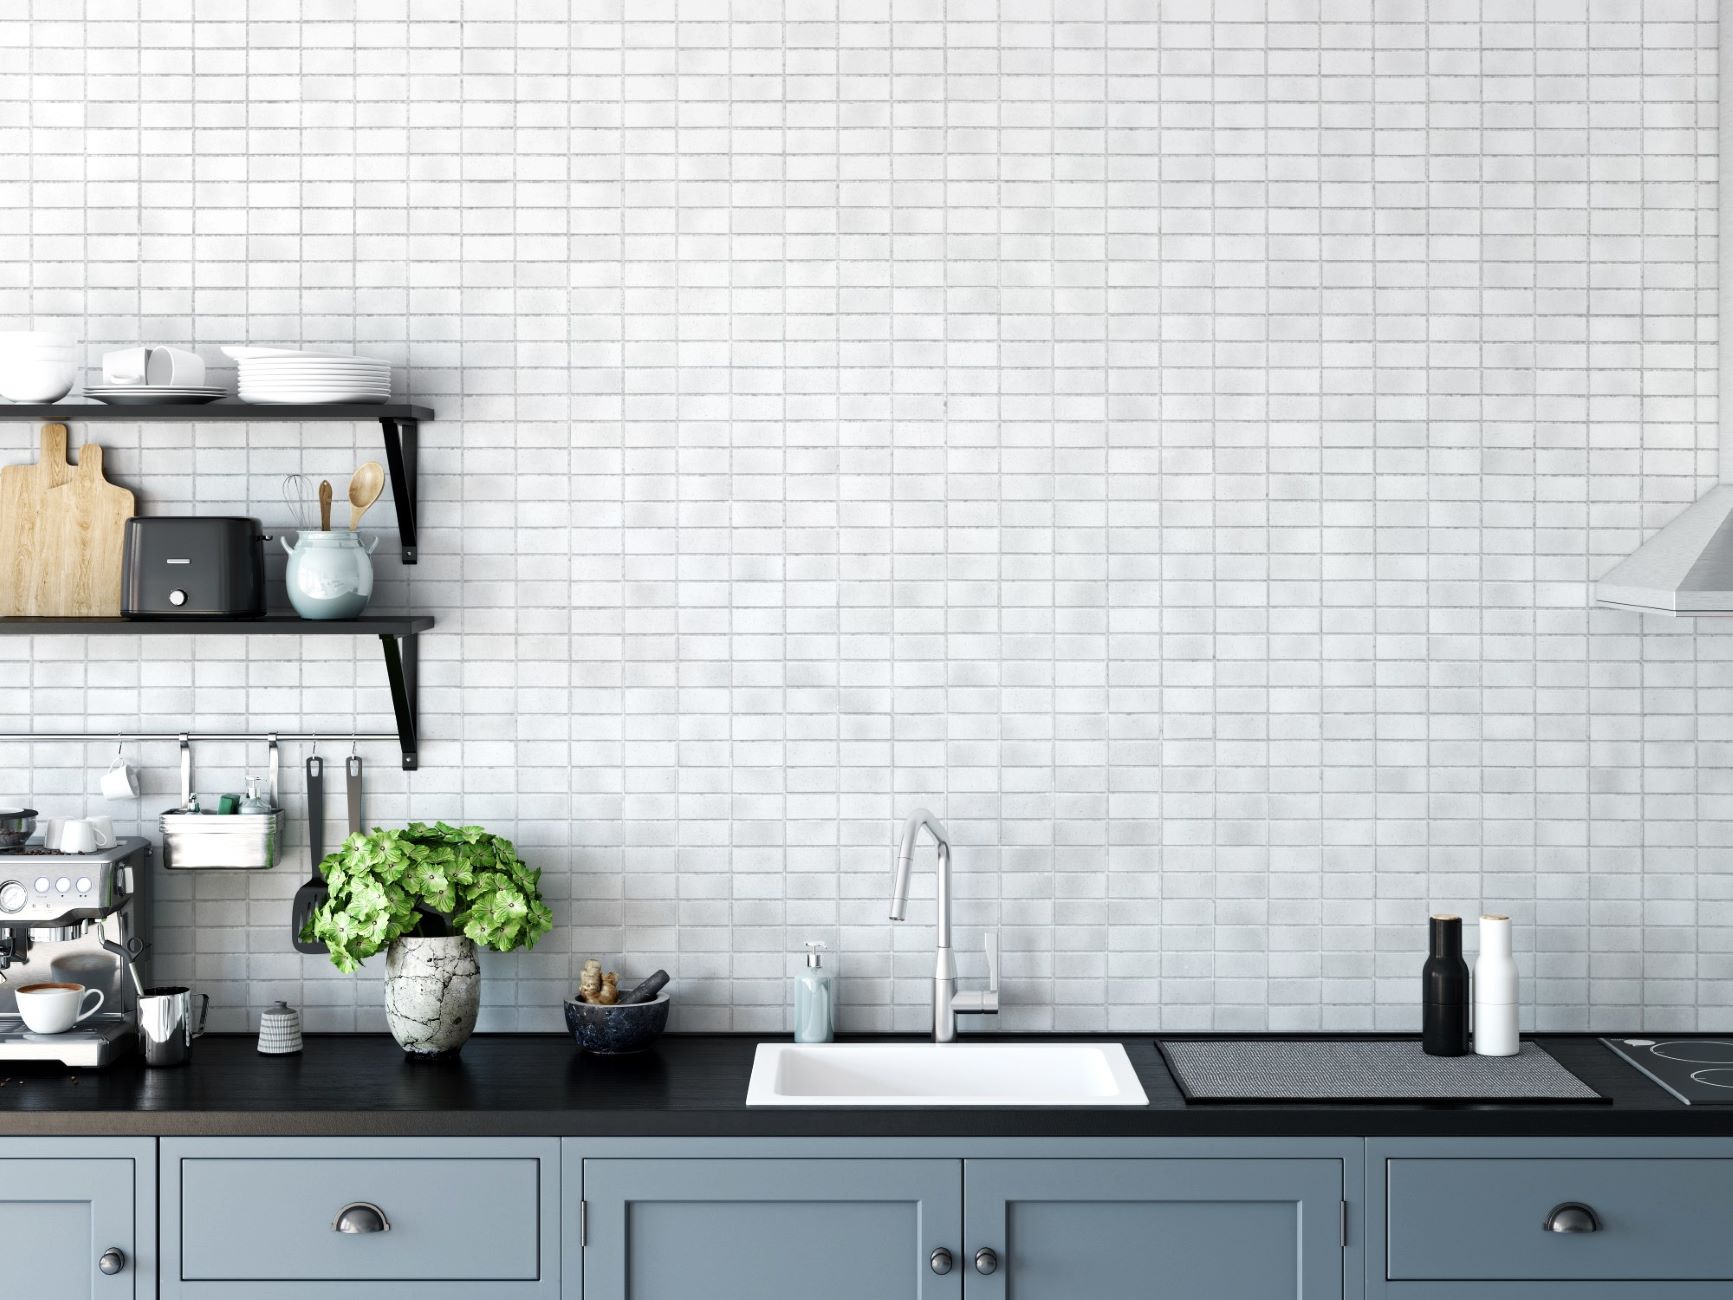 How To Match Backsplash With Countertops